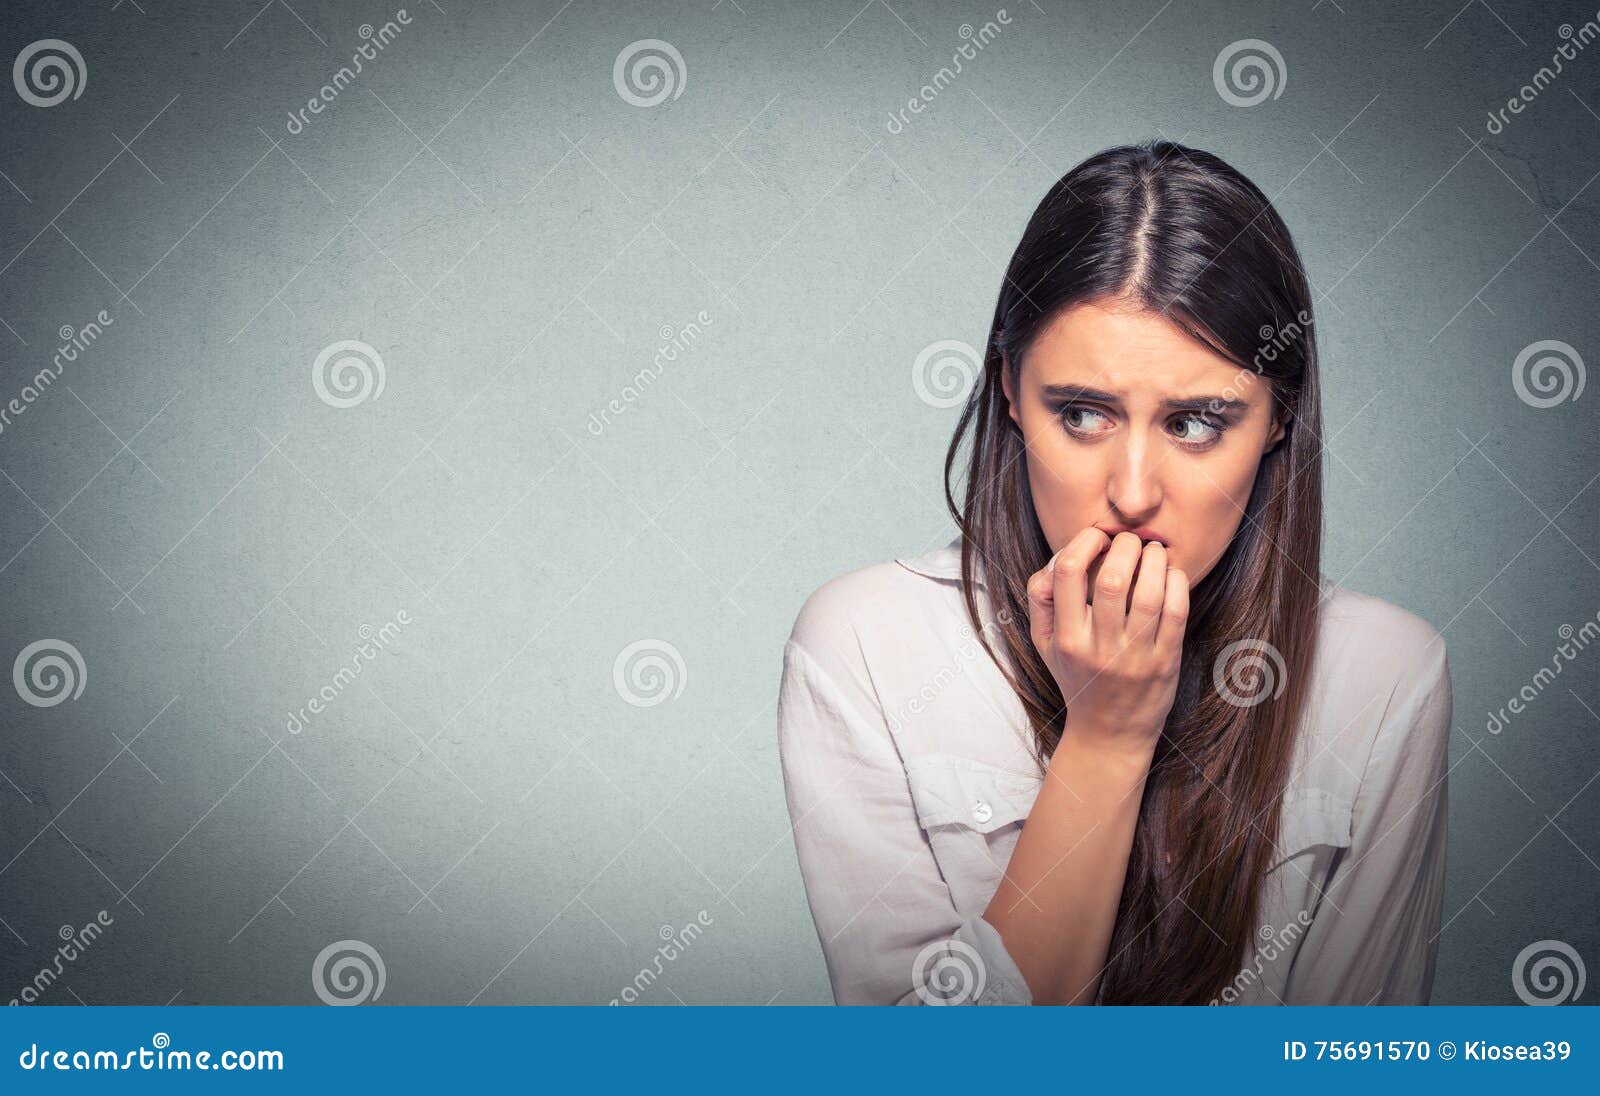 young hesitant nervous woman biting fingernails craving or anxious